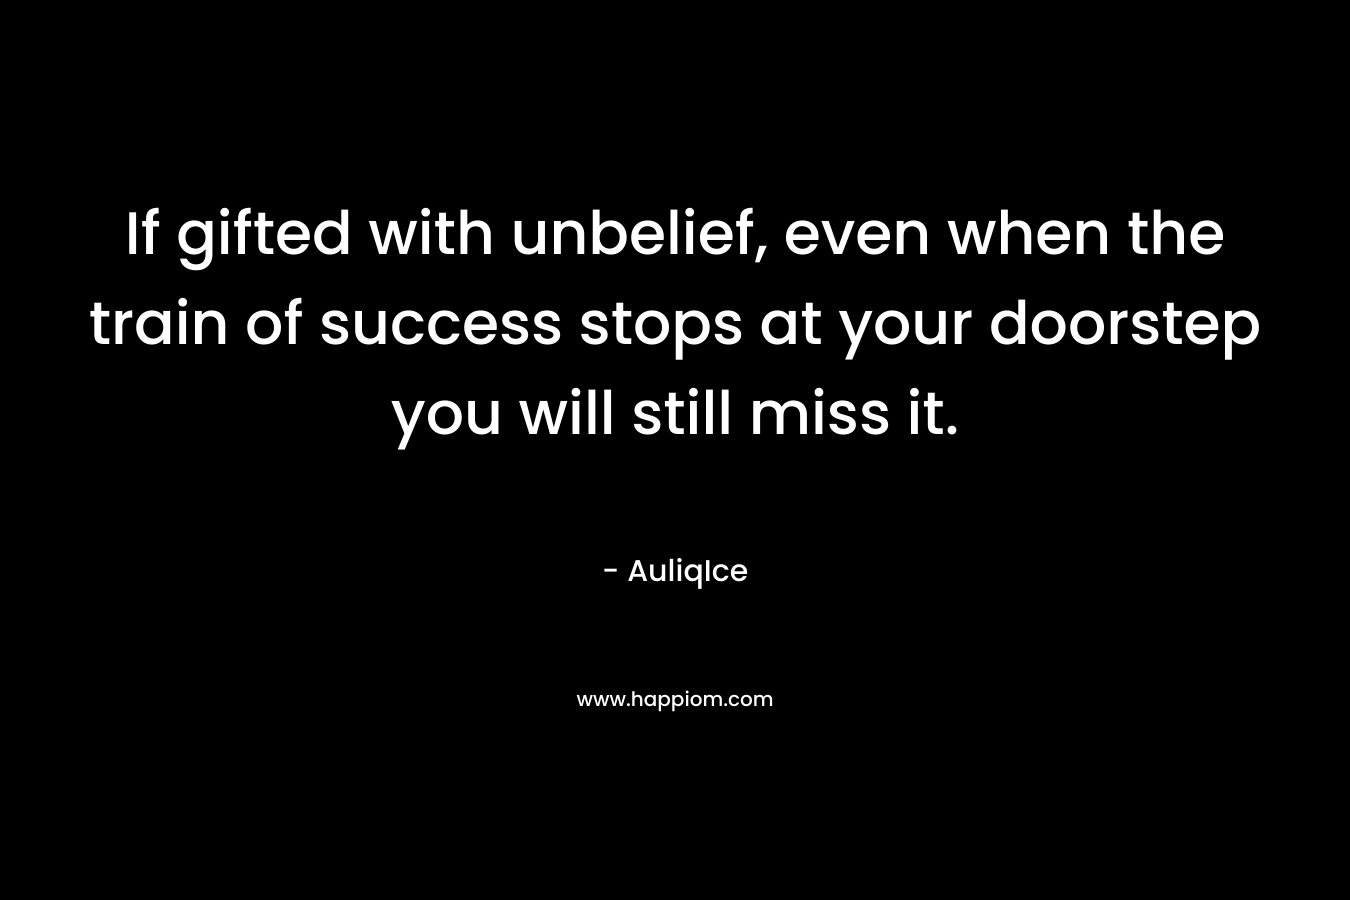 If gifted with unbelief, even when the train of success stops at your doorstep you will still miss it. – AuliqIce